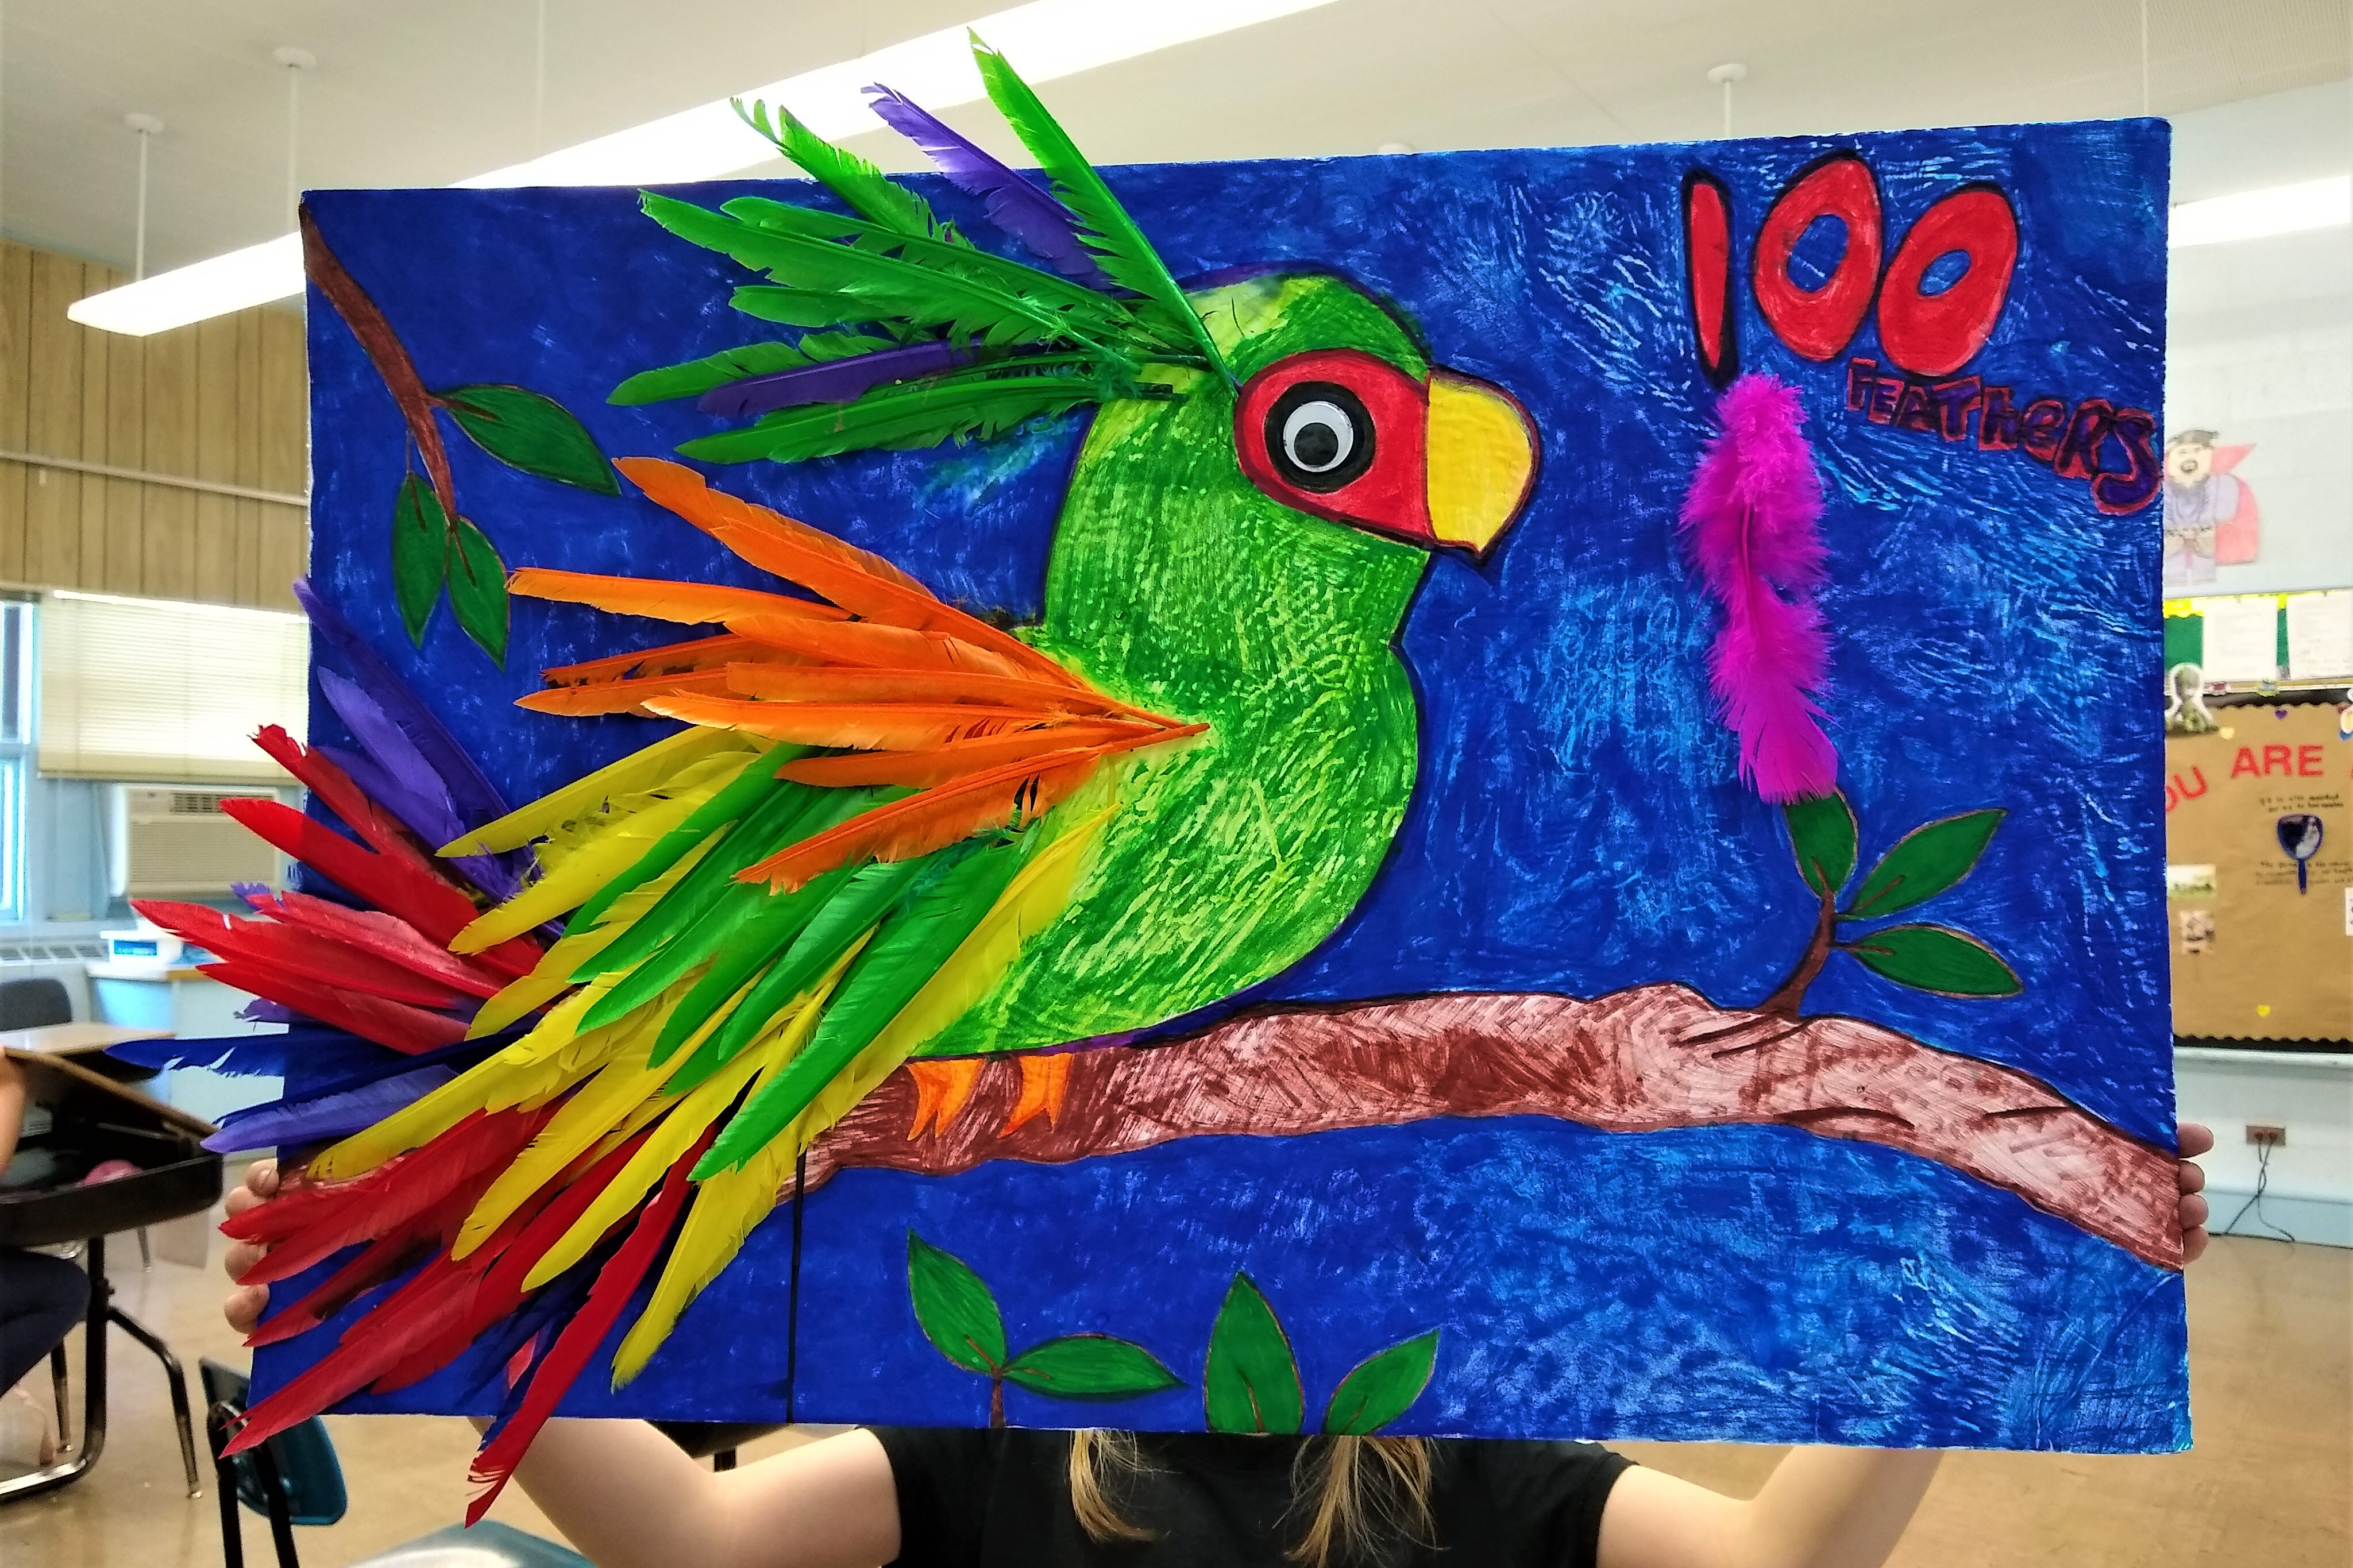 A student created this beautiful art piece with 100 feathers.